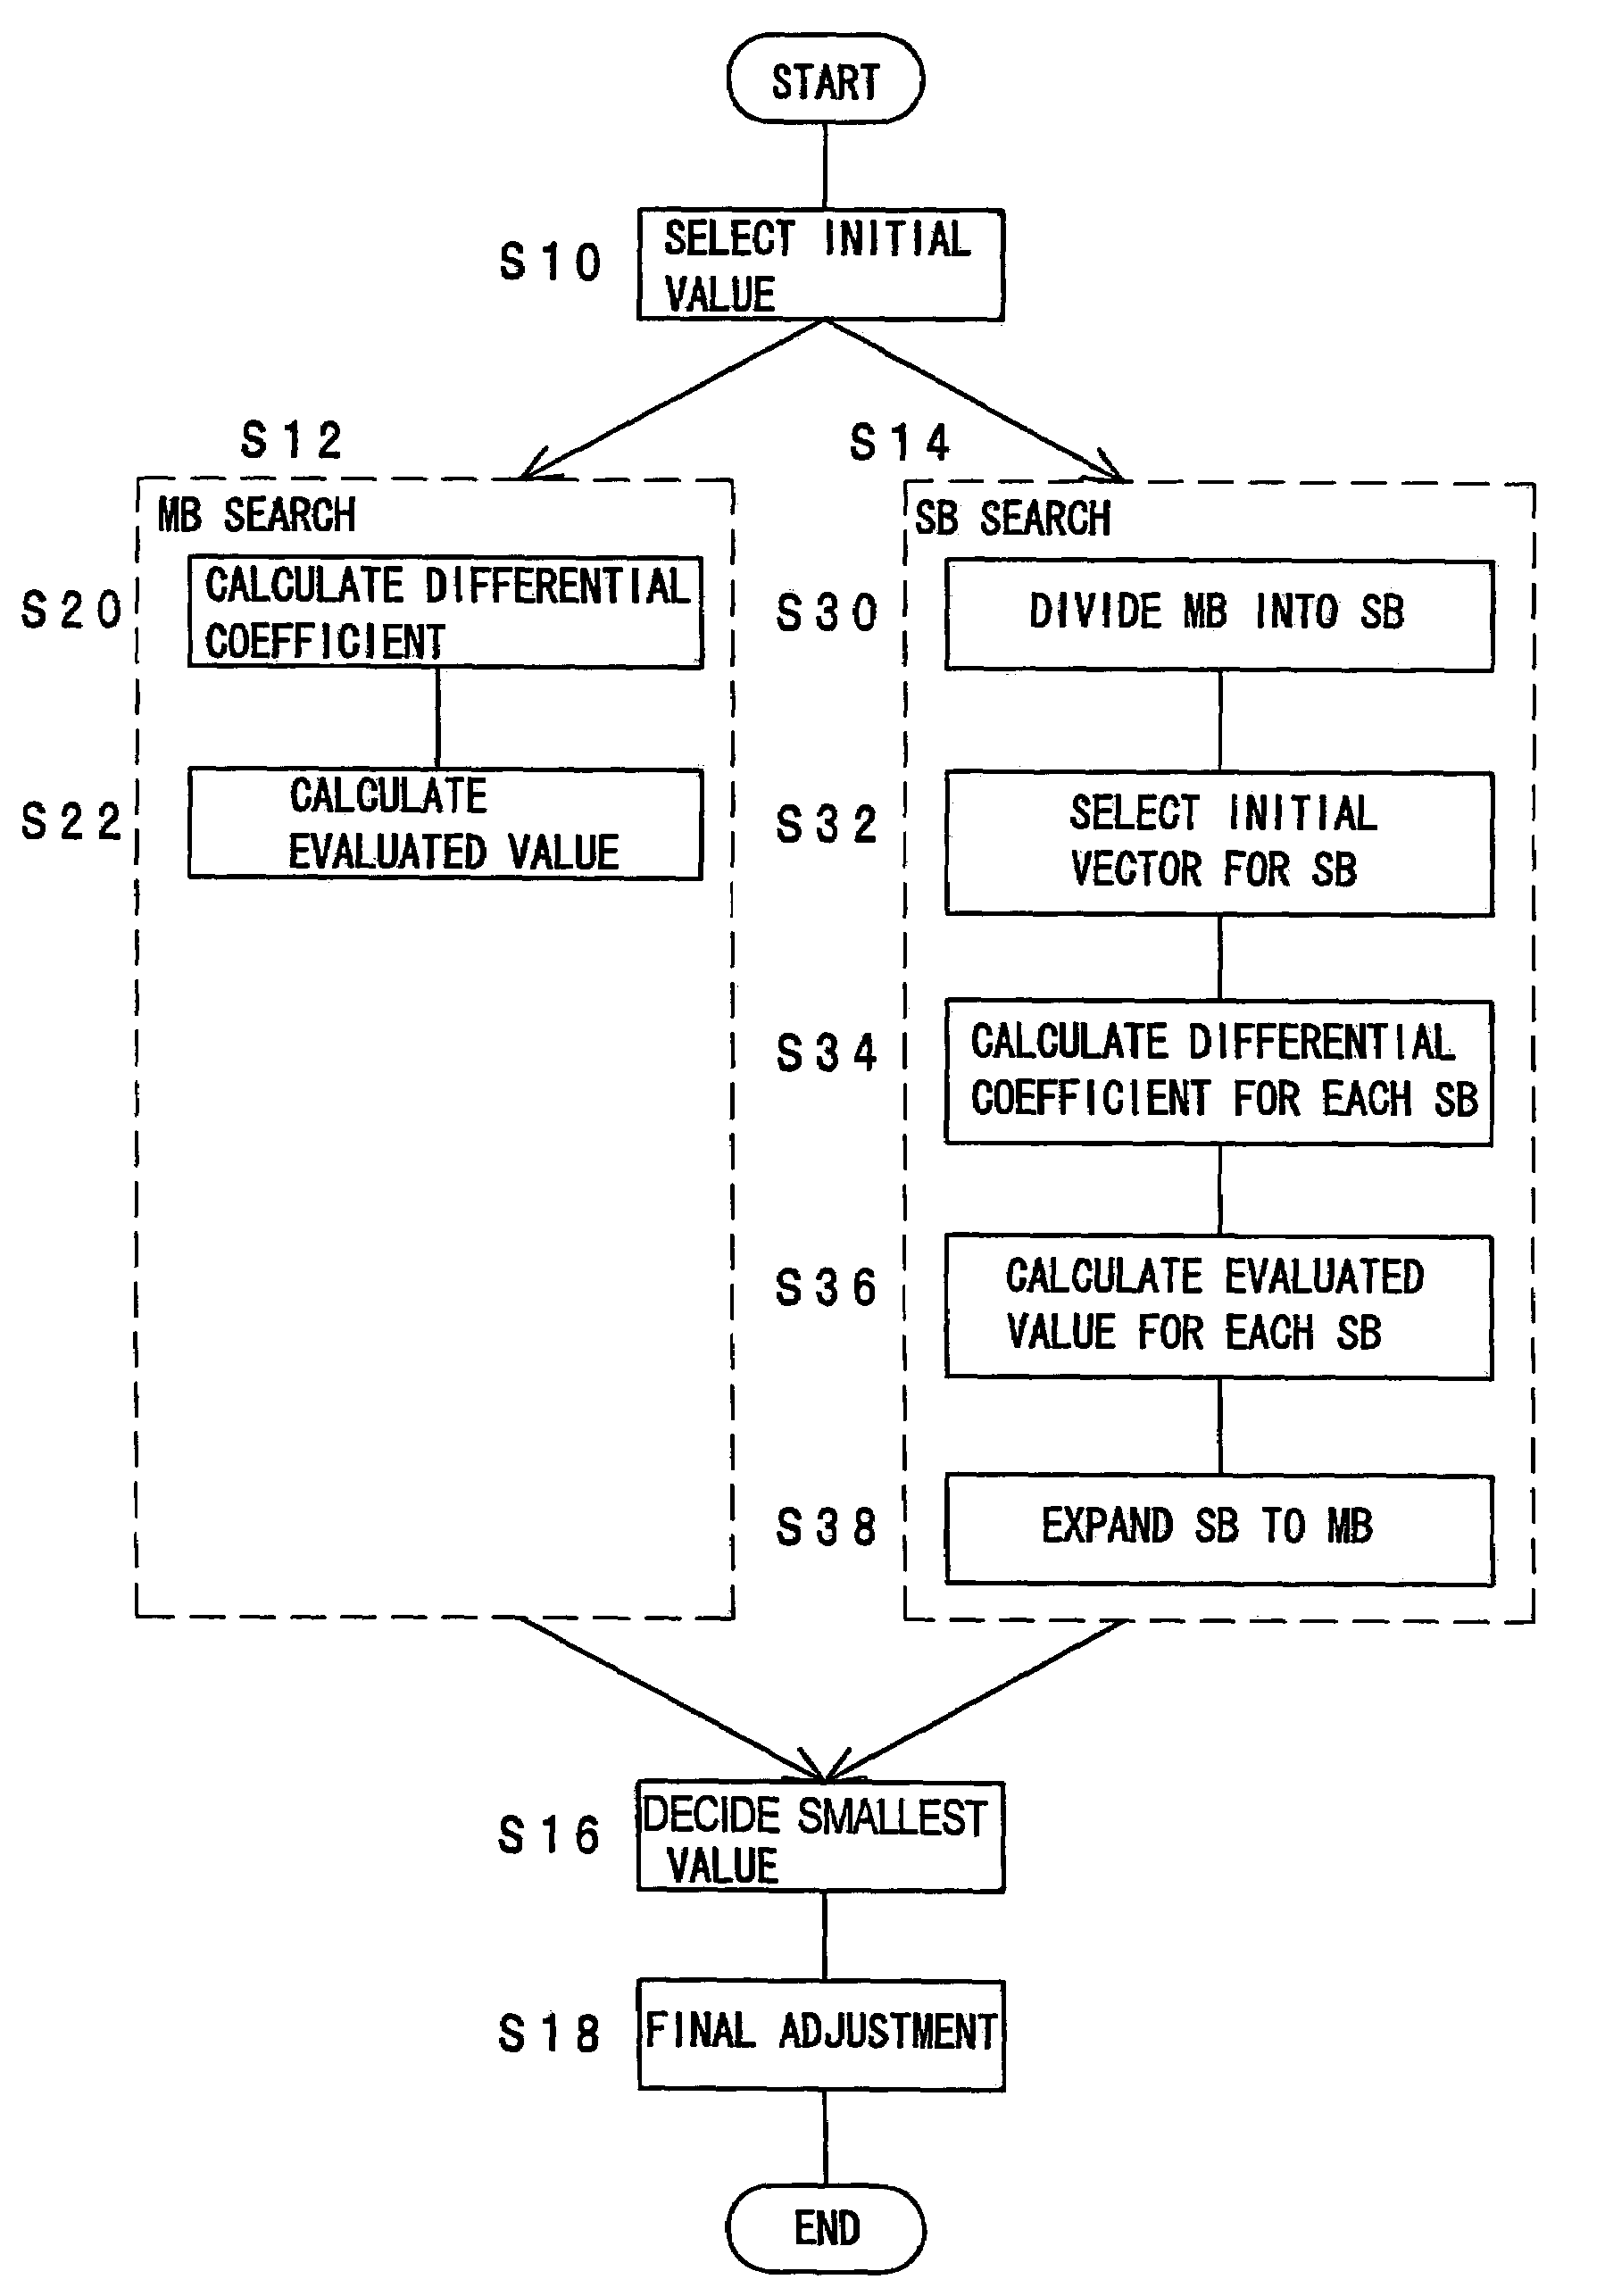 Image encoding of moving pictures